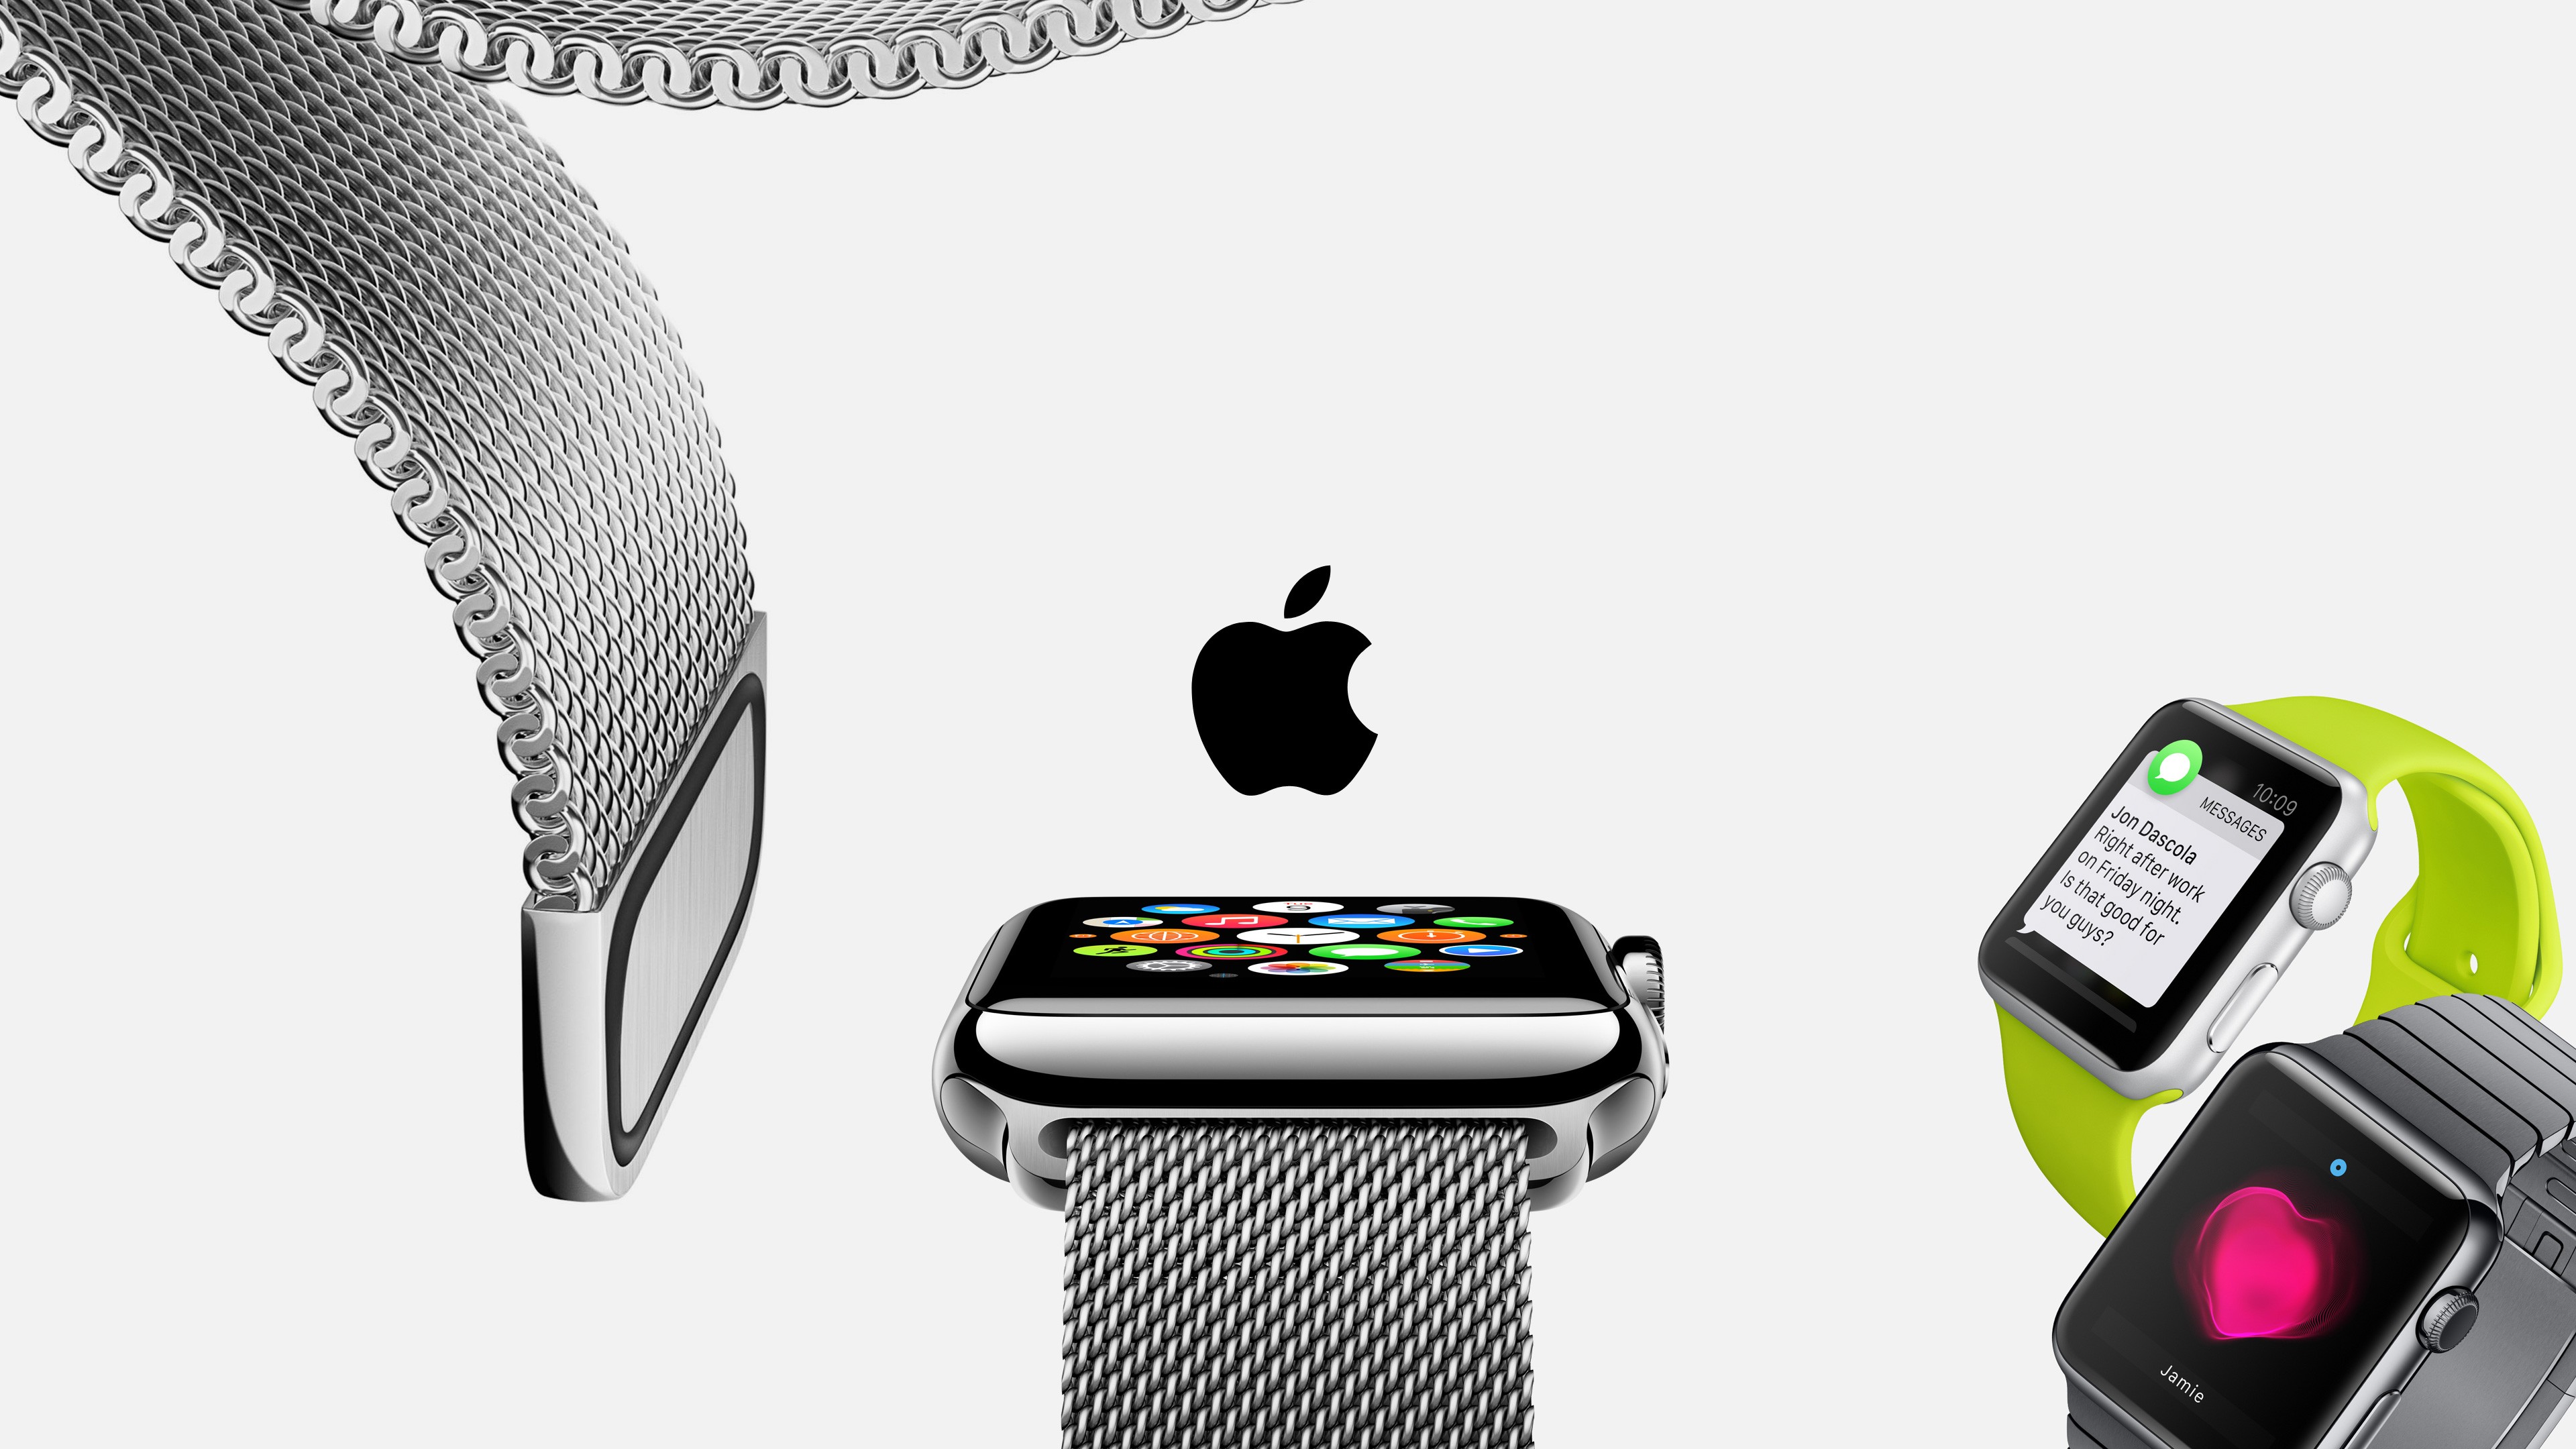 Wallpaper Apple Watch, watches, wallpaper, 5k, 4k, review, iWatch, Apple,  interface, display, silver, Real Futuristic Gadgets, Hi-Tech #3515